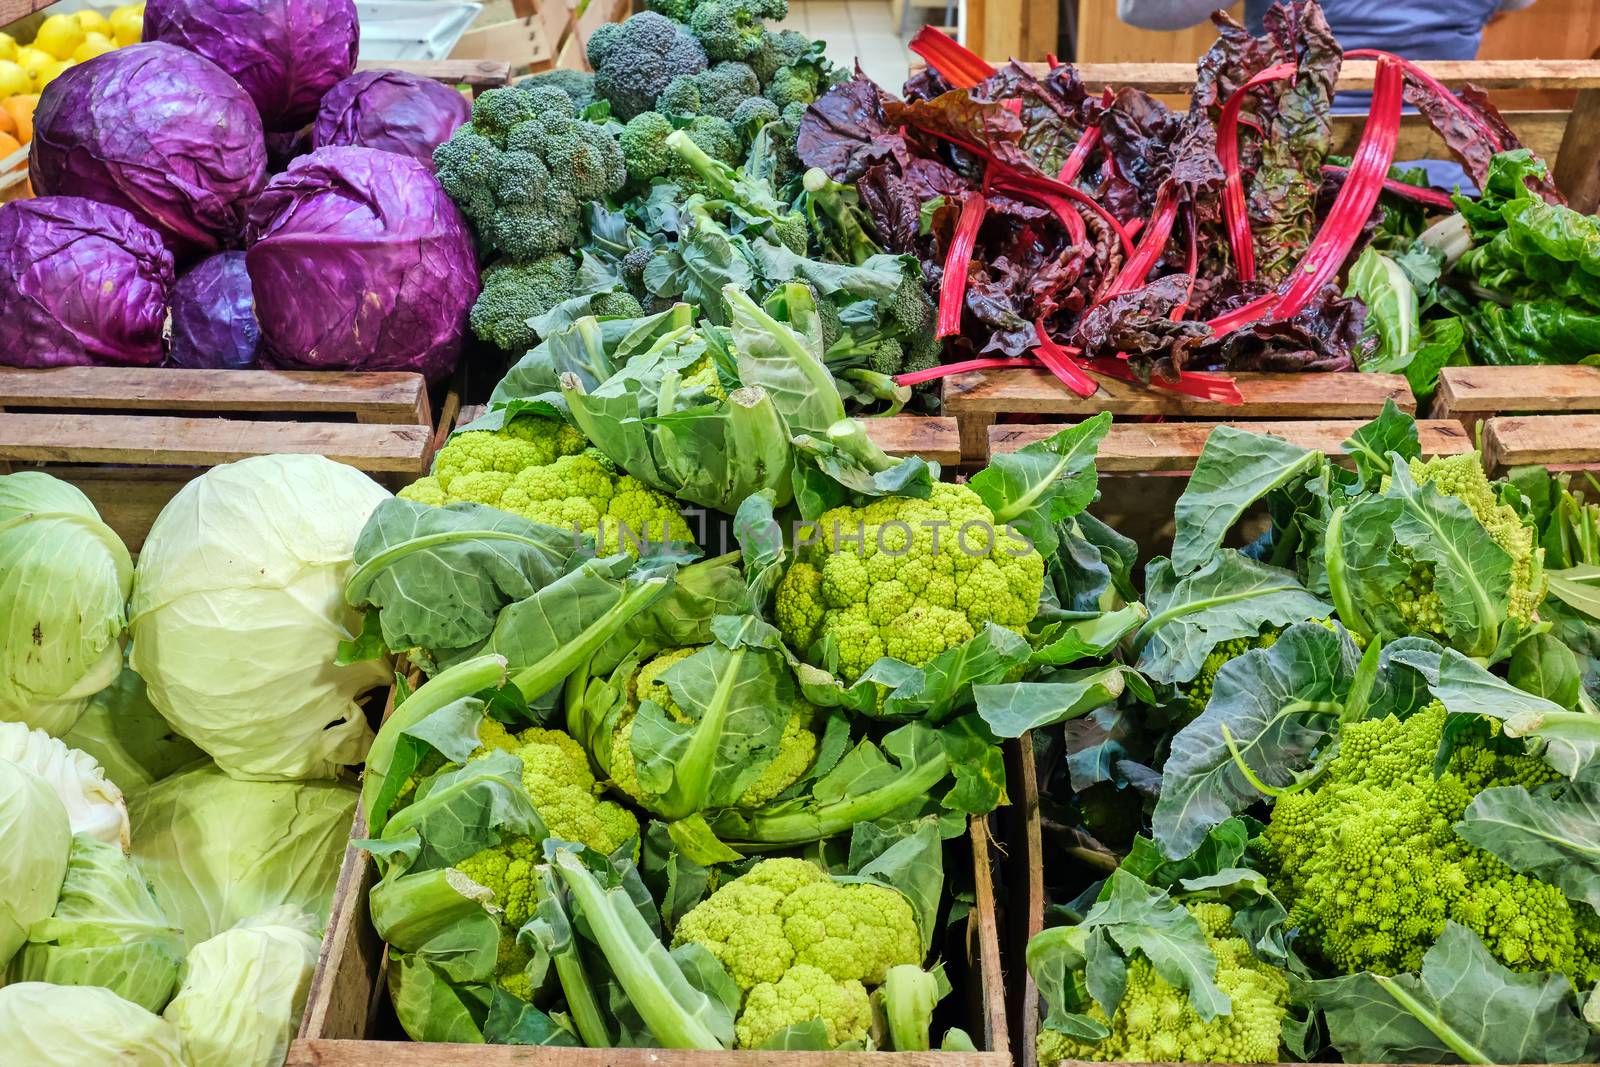 Cabbage and broccoli for sale at a market